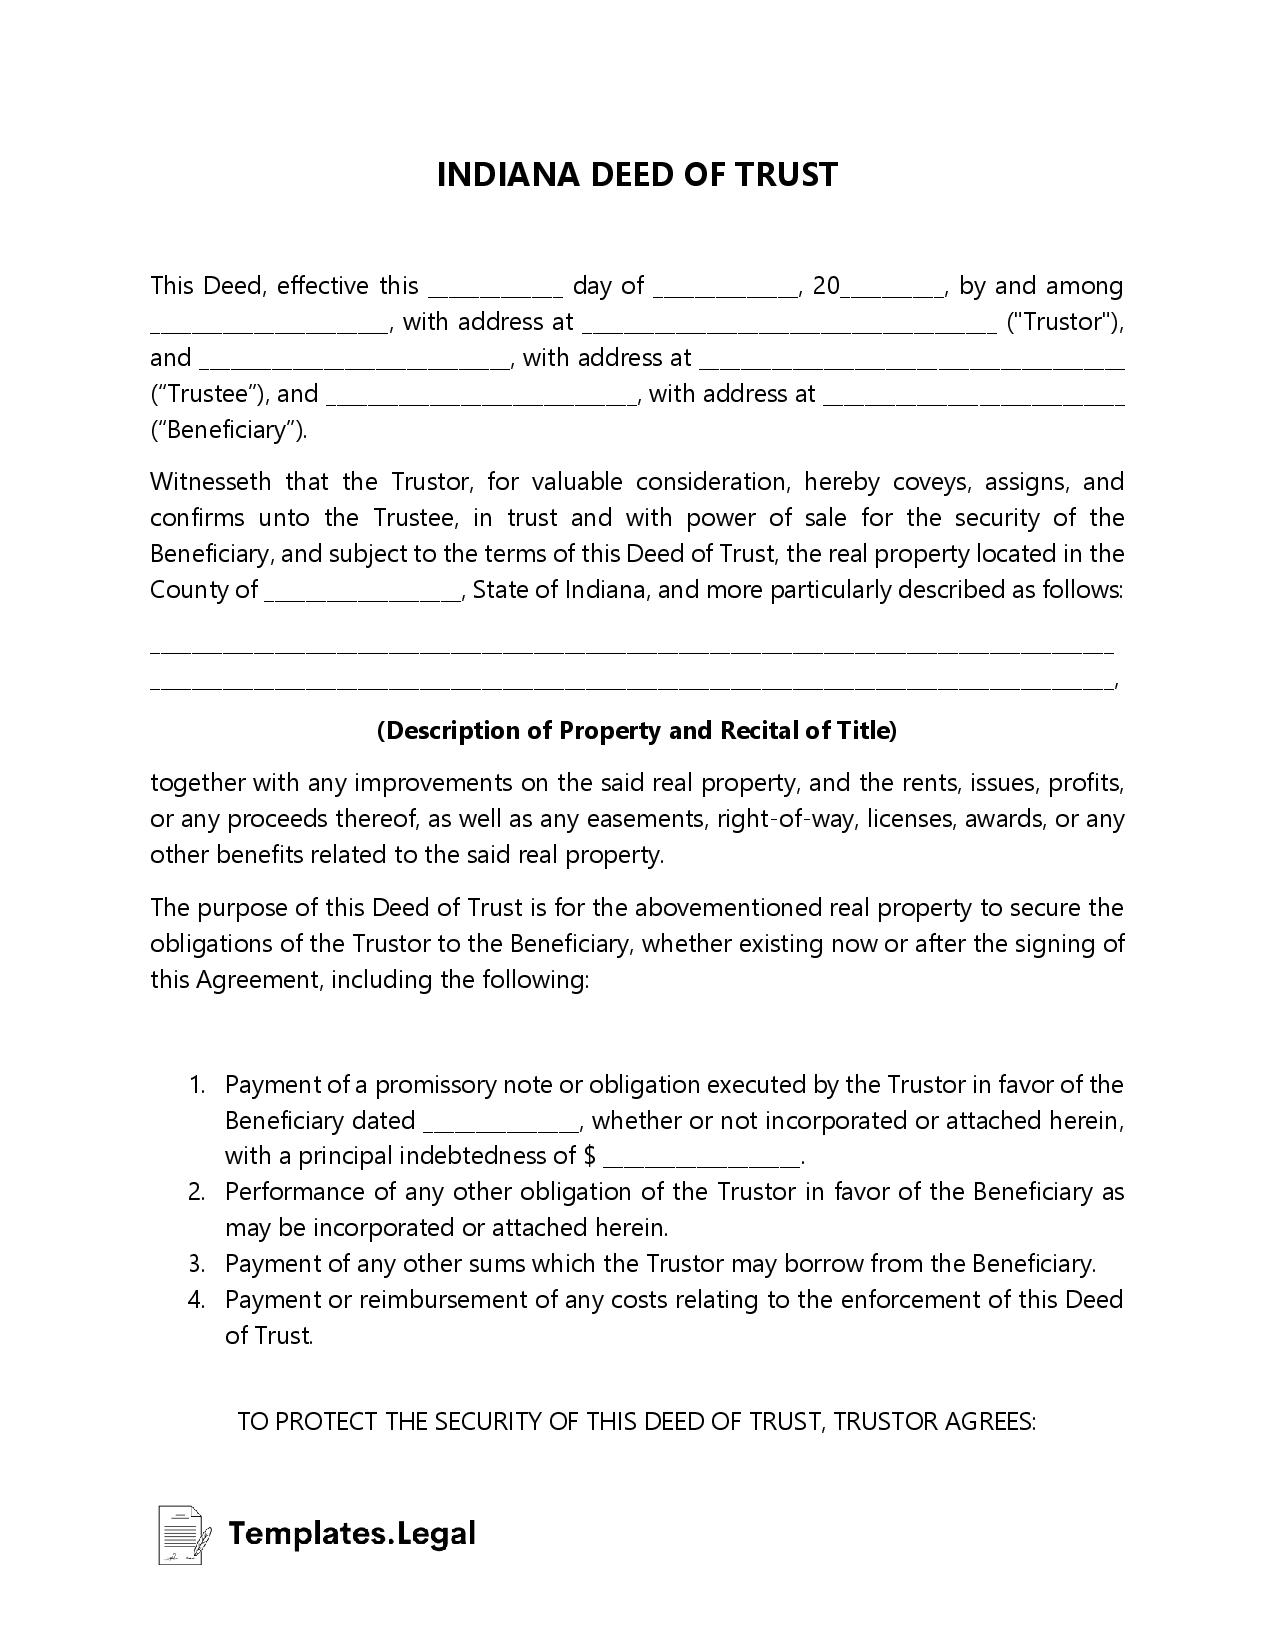 Indiana Deed of Trust - Templates.Legal